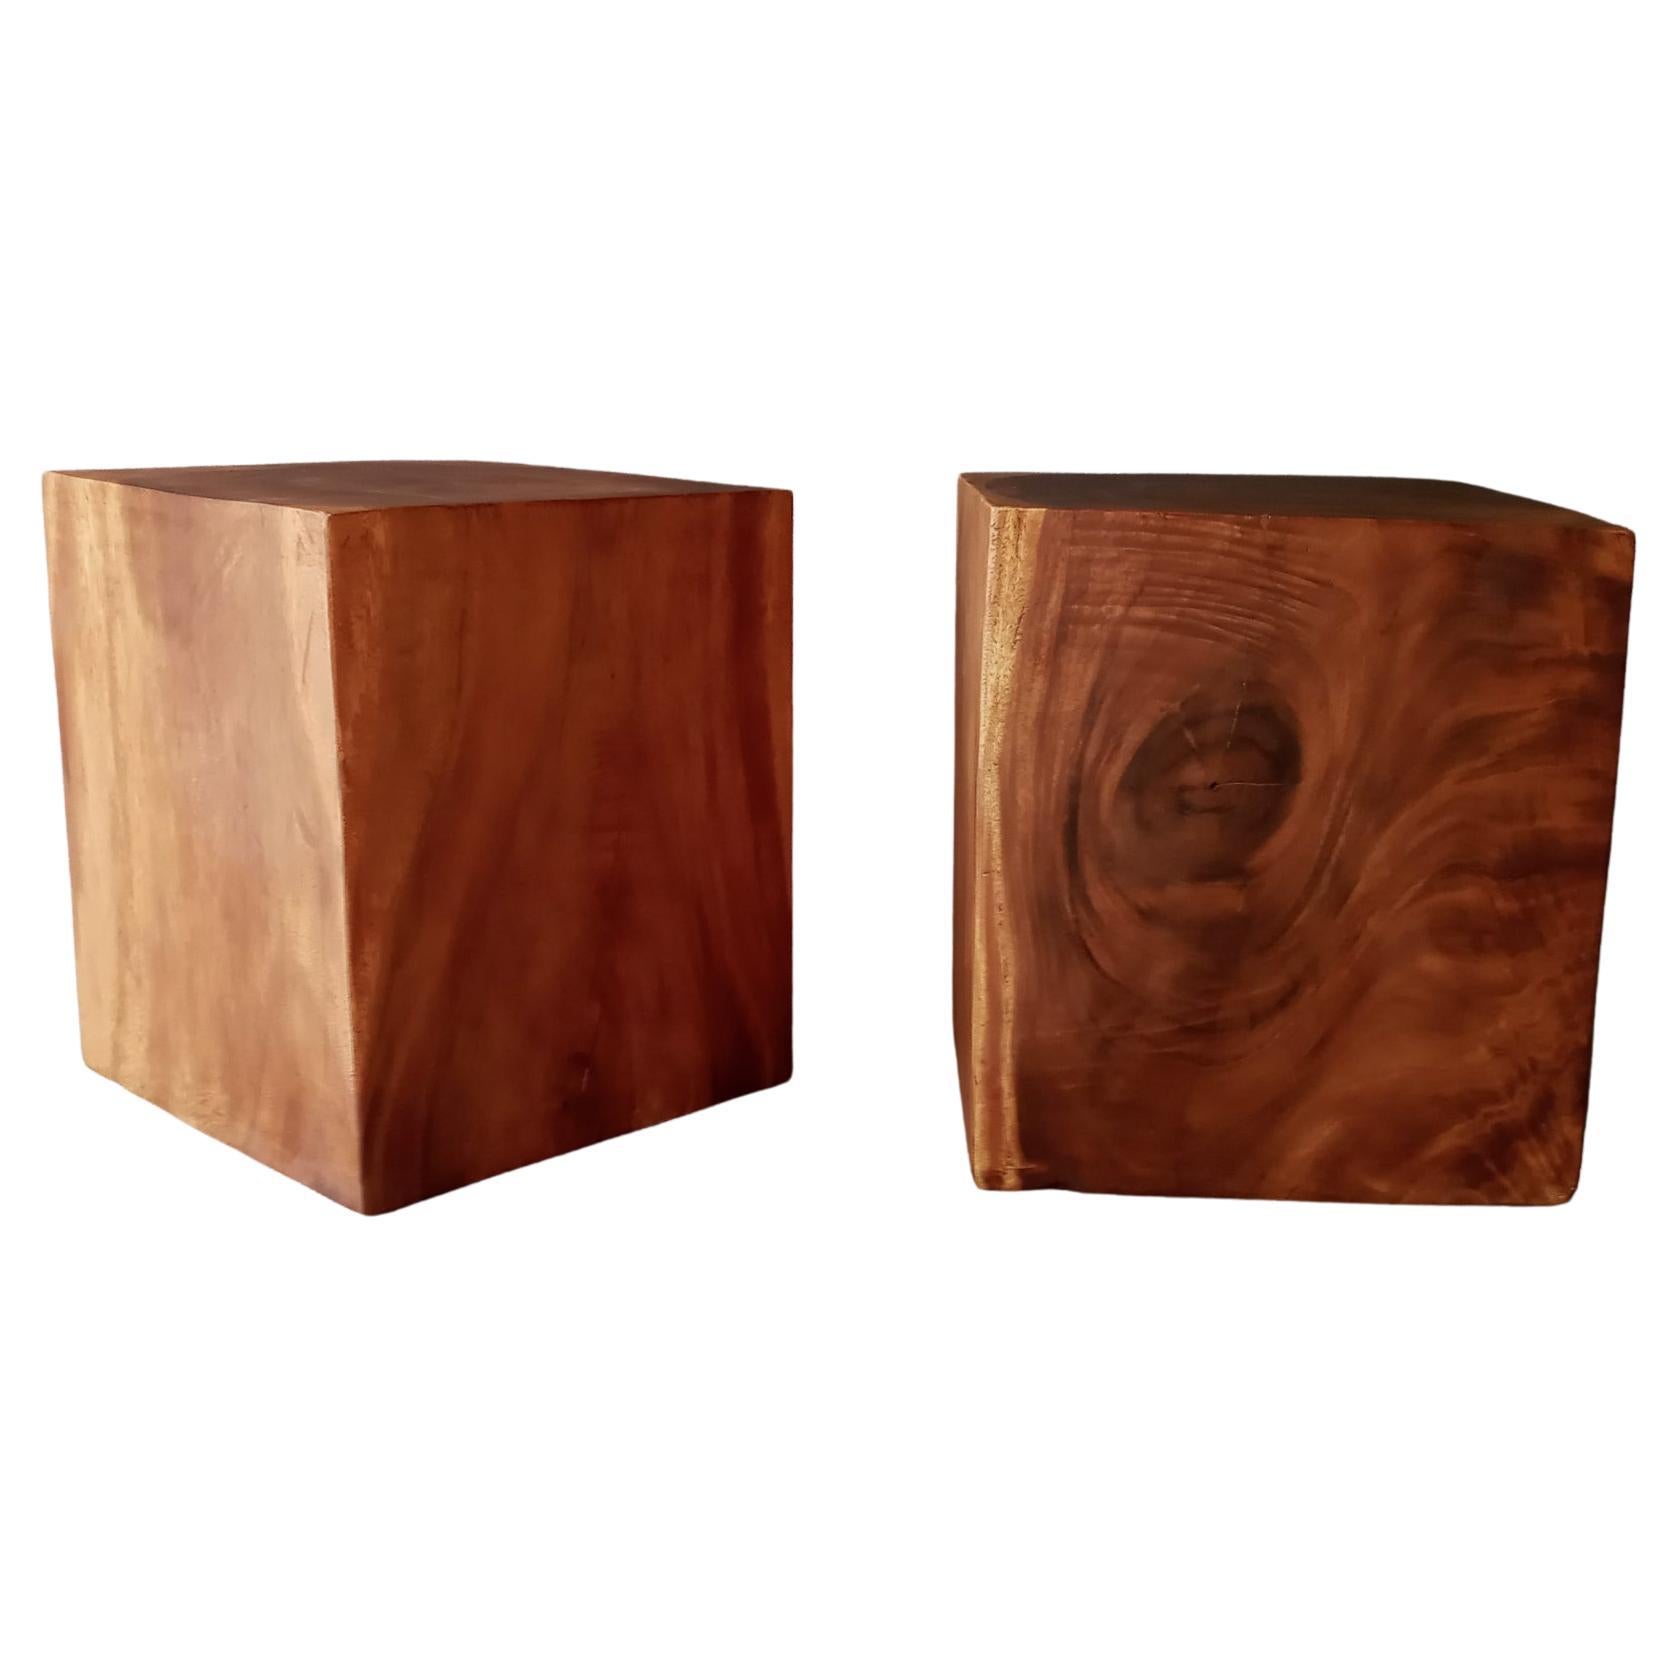 A pair of stunning solid teak cube form end or side tables. These are vintage beauties with dramatic graining and a warm patina. Each has a hollowed core but the wall are roughly 3